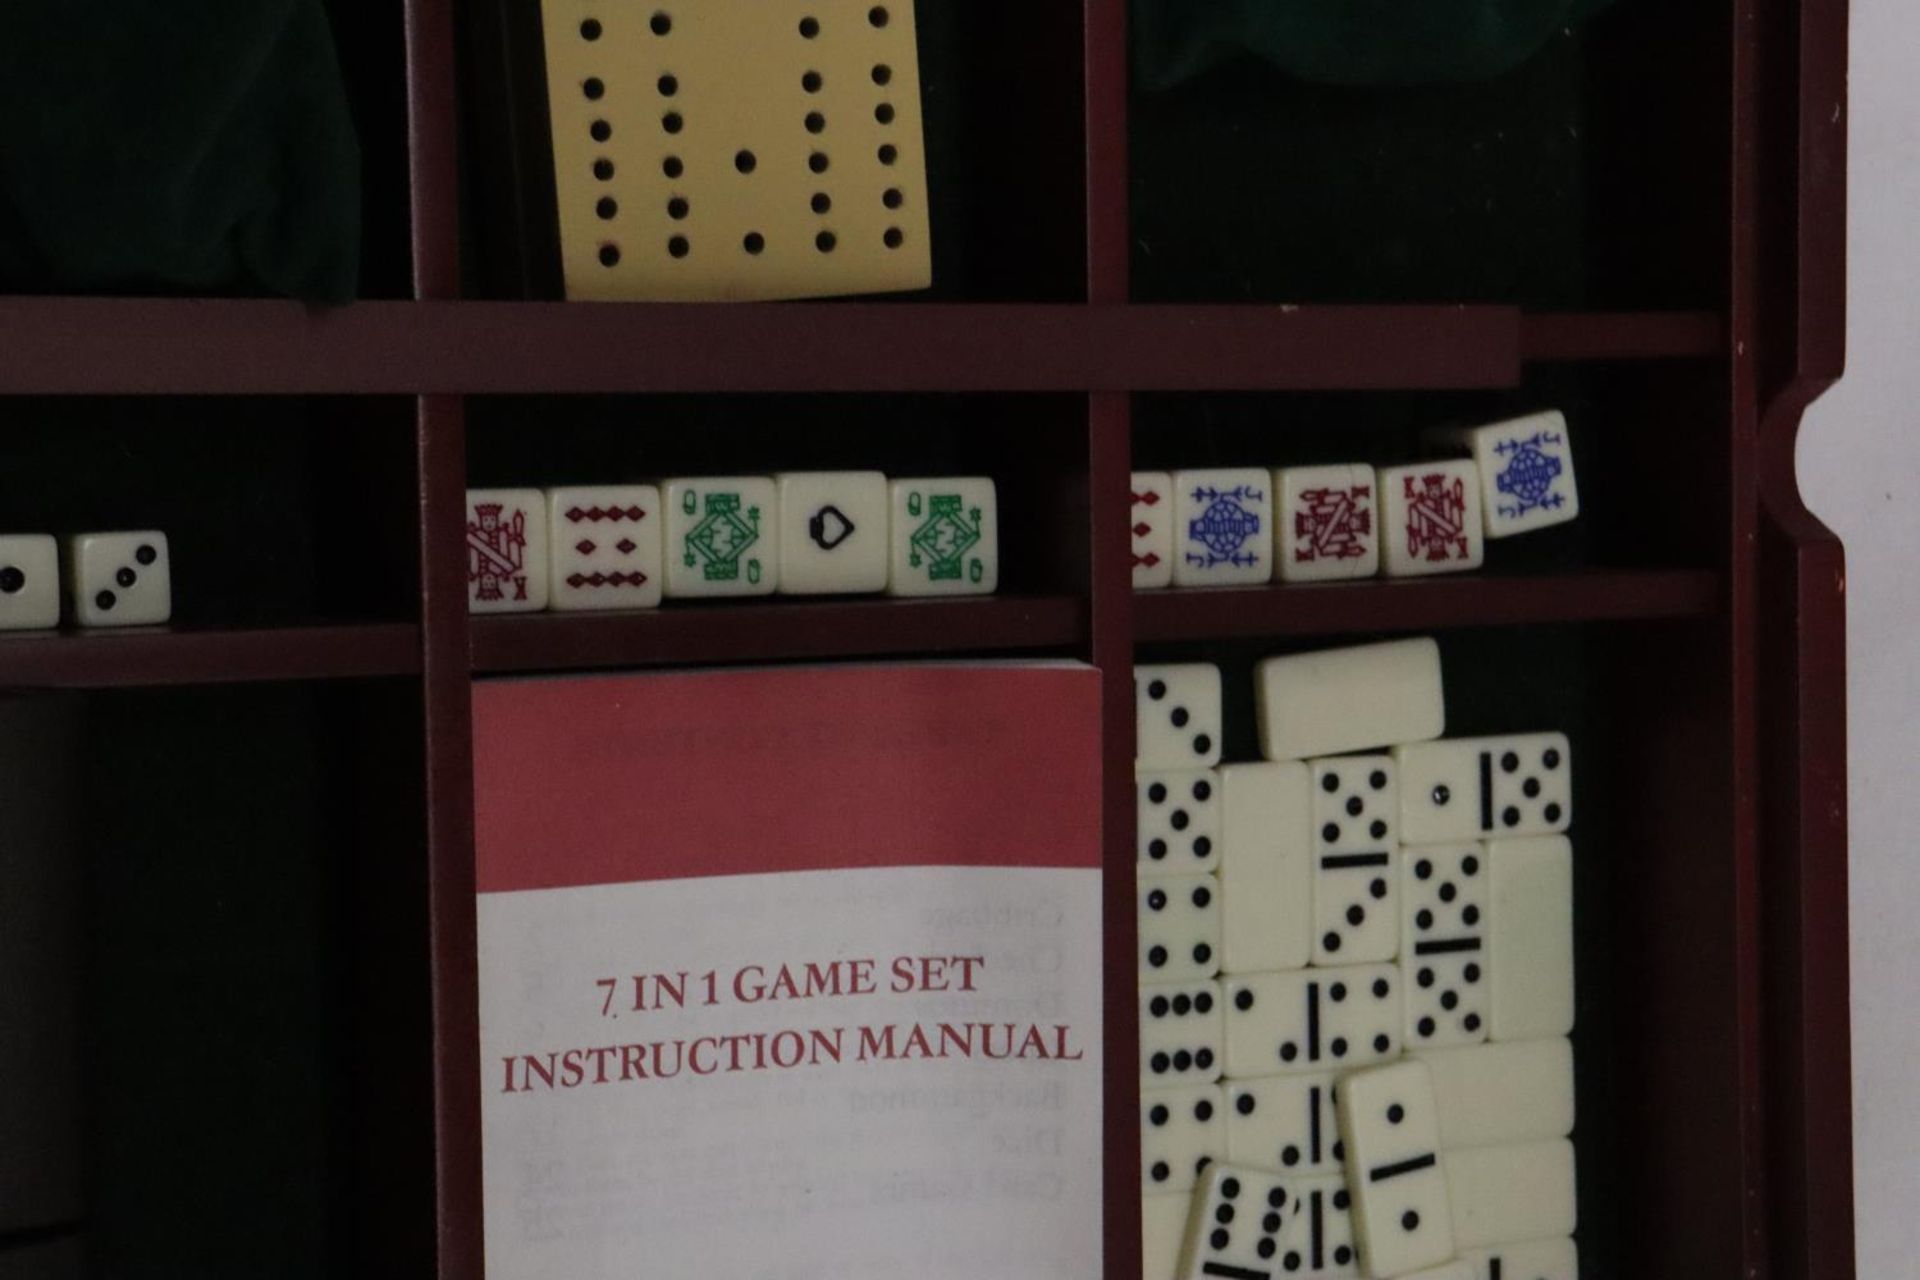 A 7 IN 1 COMPENDIUM SET TO INCLUDE CHESS, DRAUGHTS, BACKGAMMON, ETC - Image 6 of 6